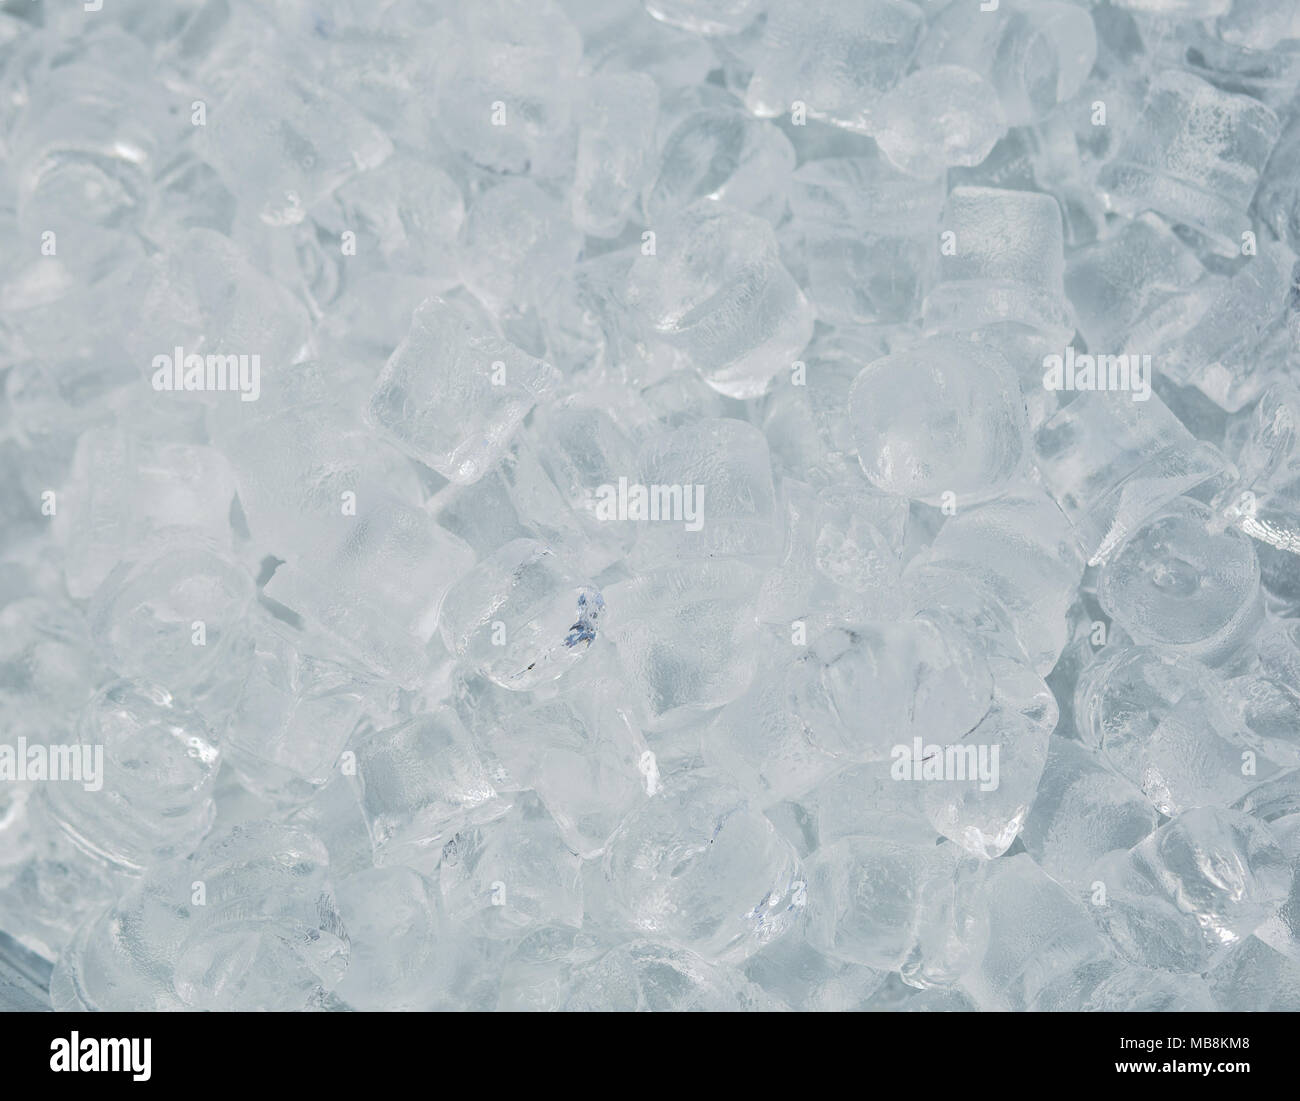 Top view of many transparent cubes of ice ready to use in drinks and cocktails. Icy background. Stock Photo